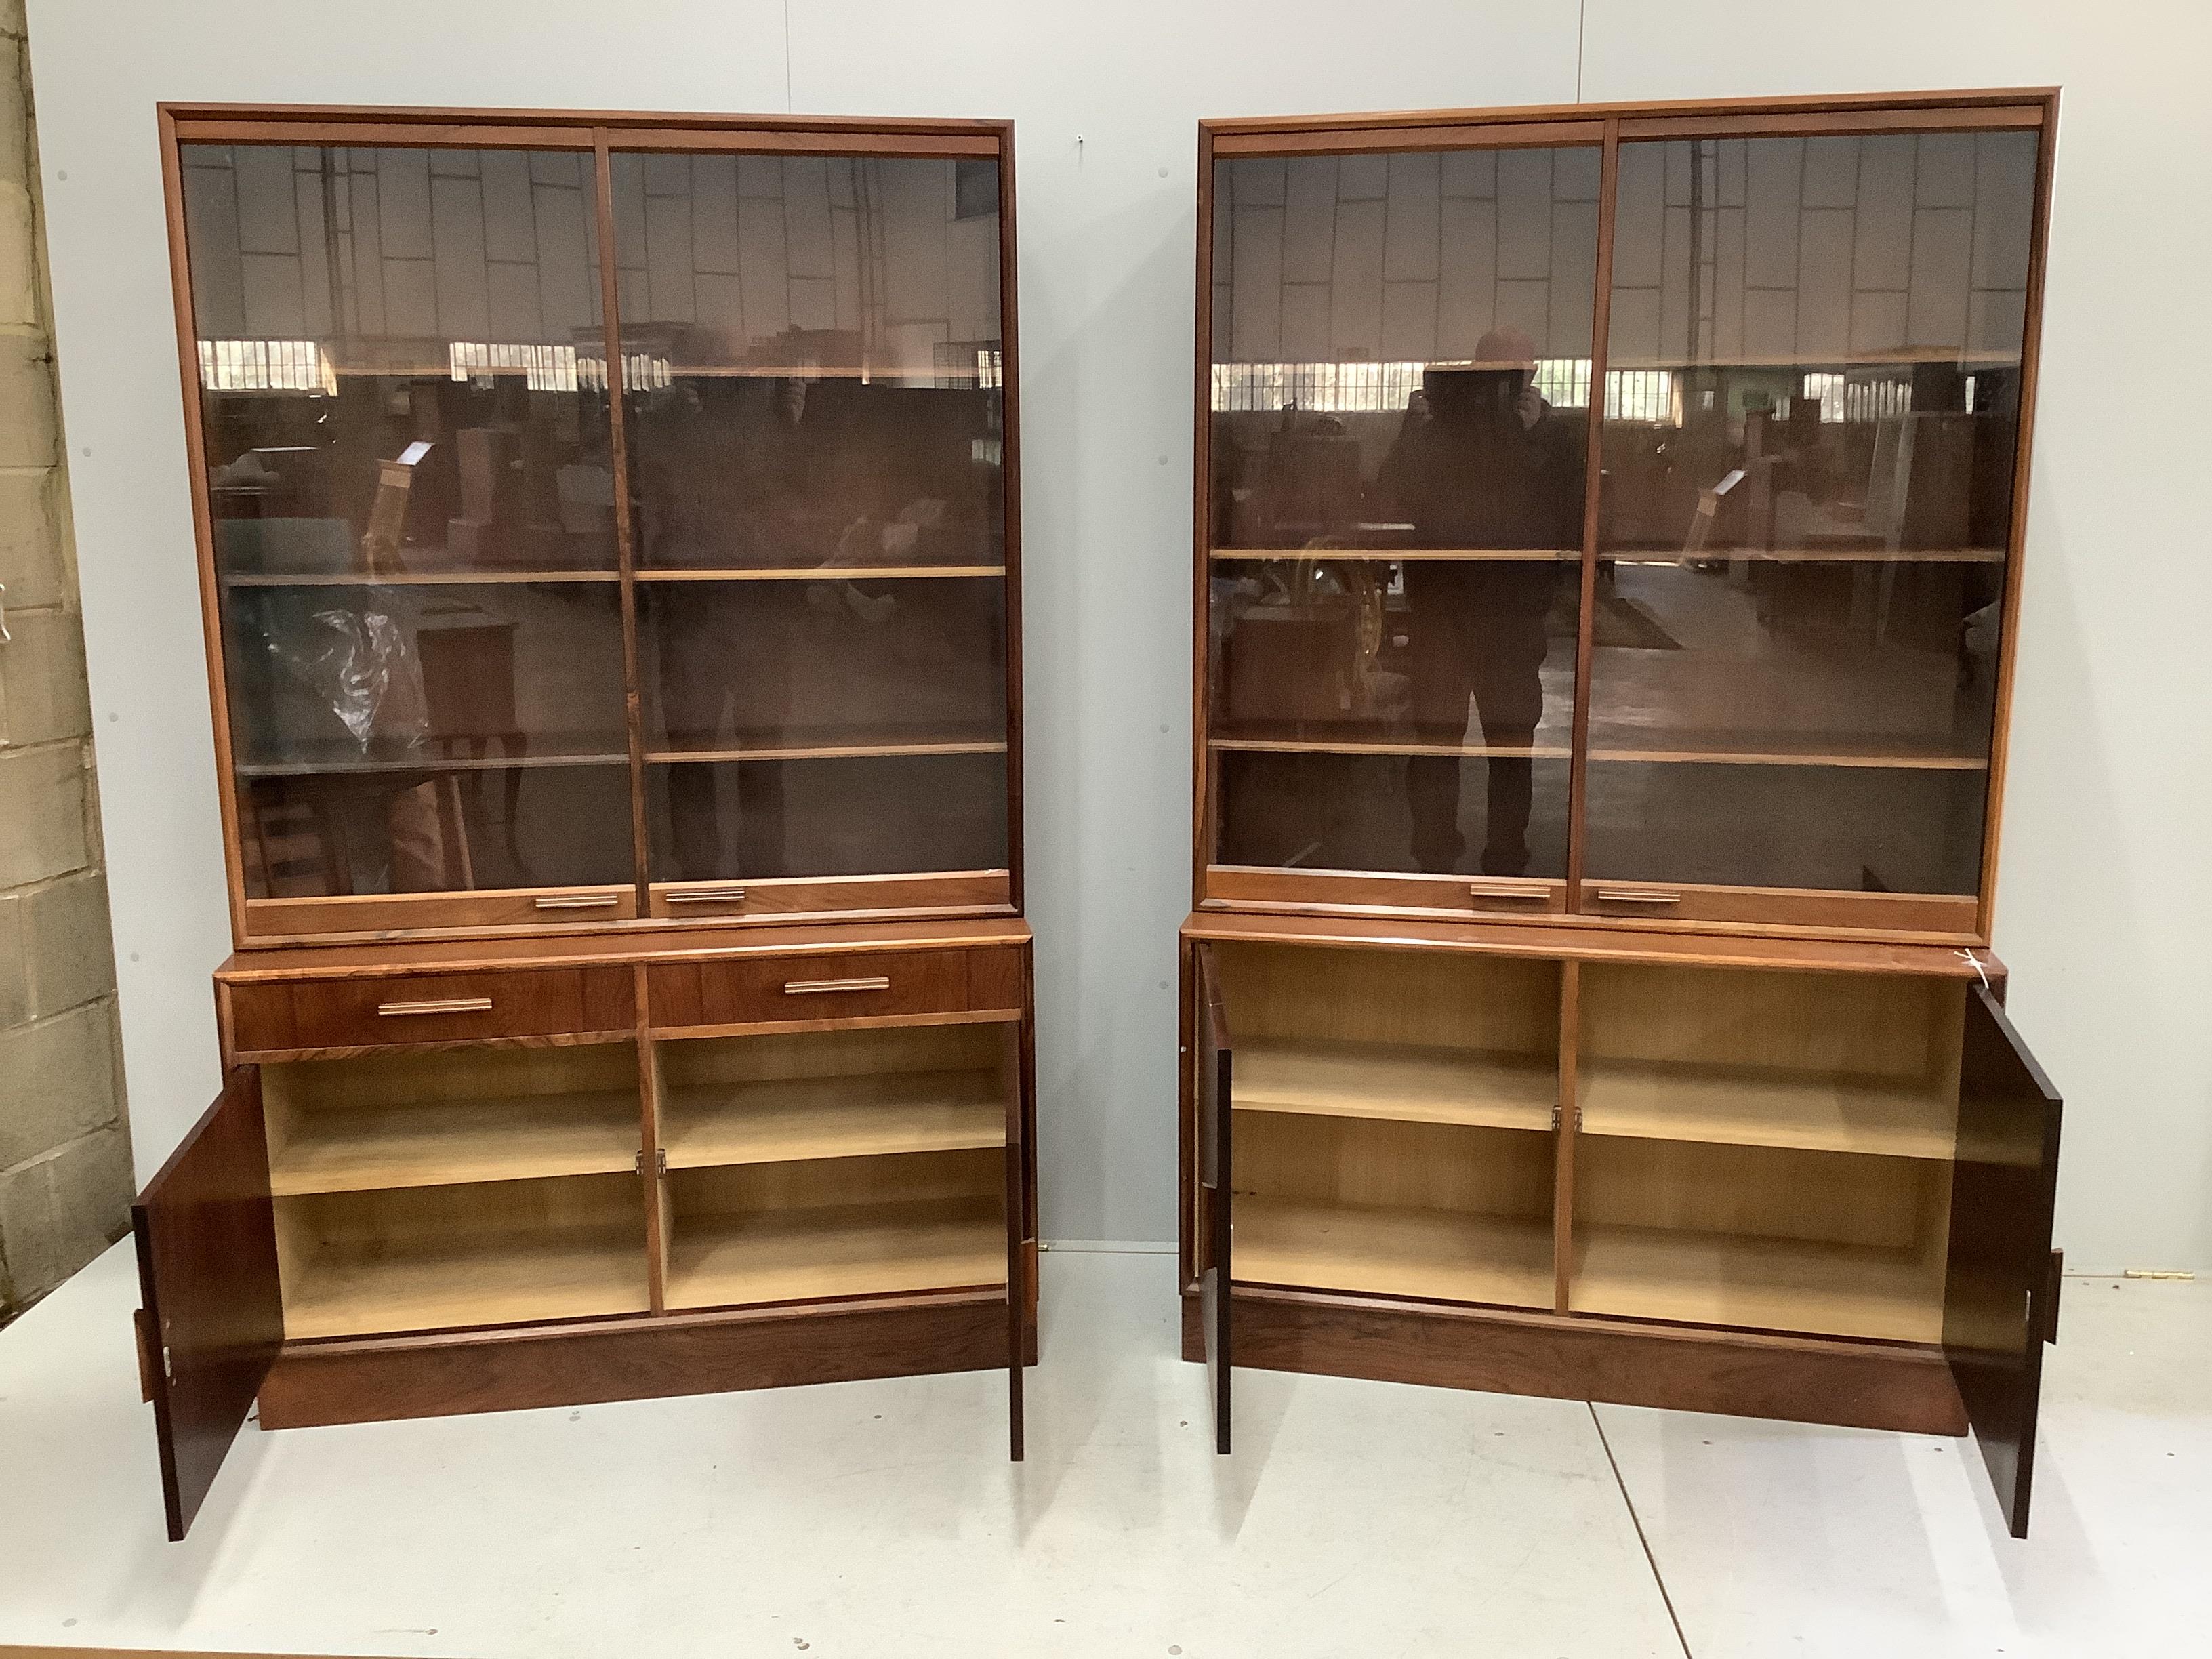 A pair of mid century Indian rosewood glazed cabinets with adjustable shelves, width 110cm, depth 38cm, height 180cm